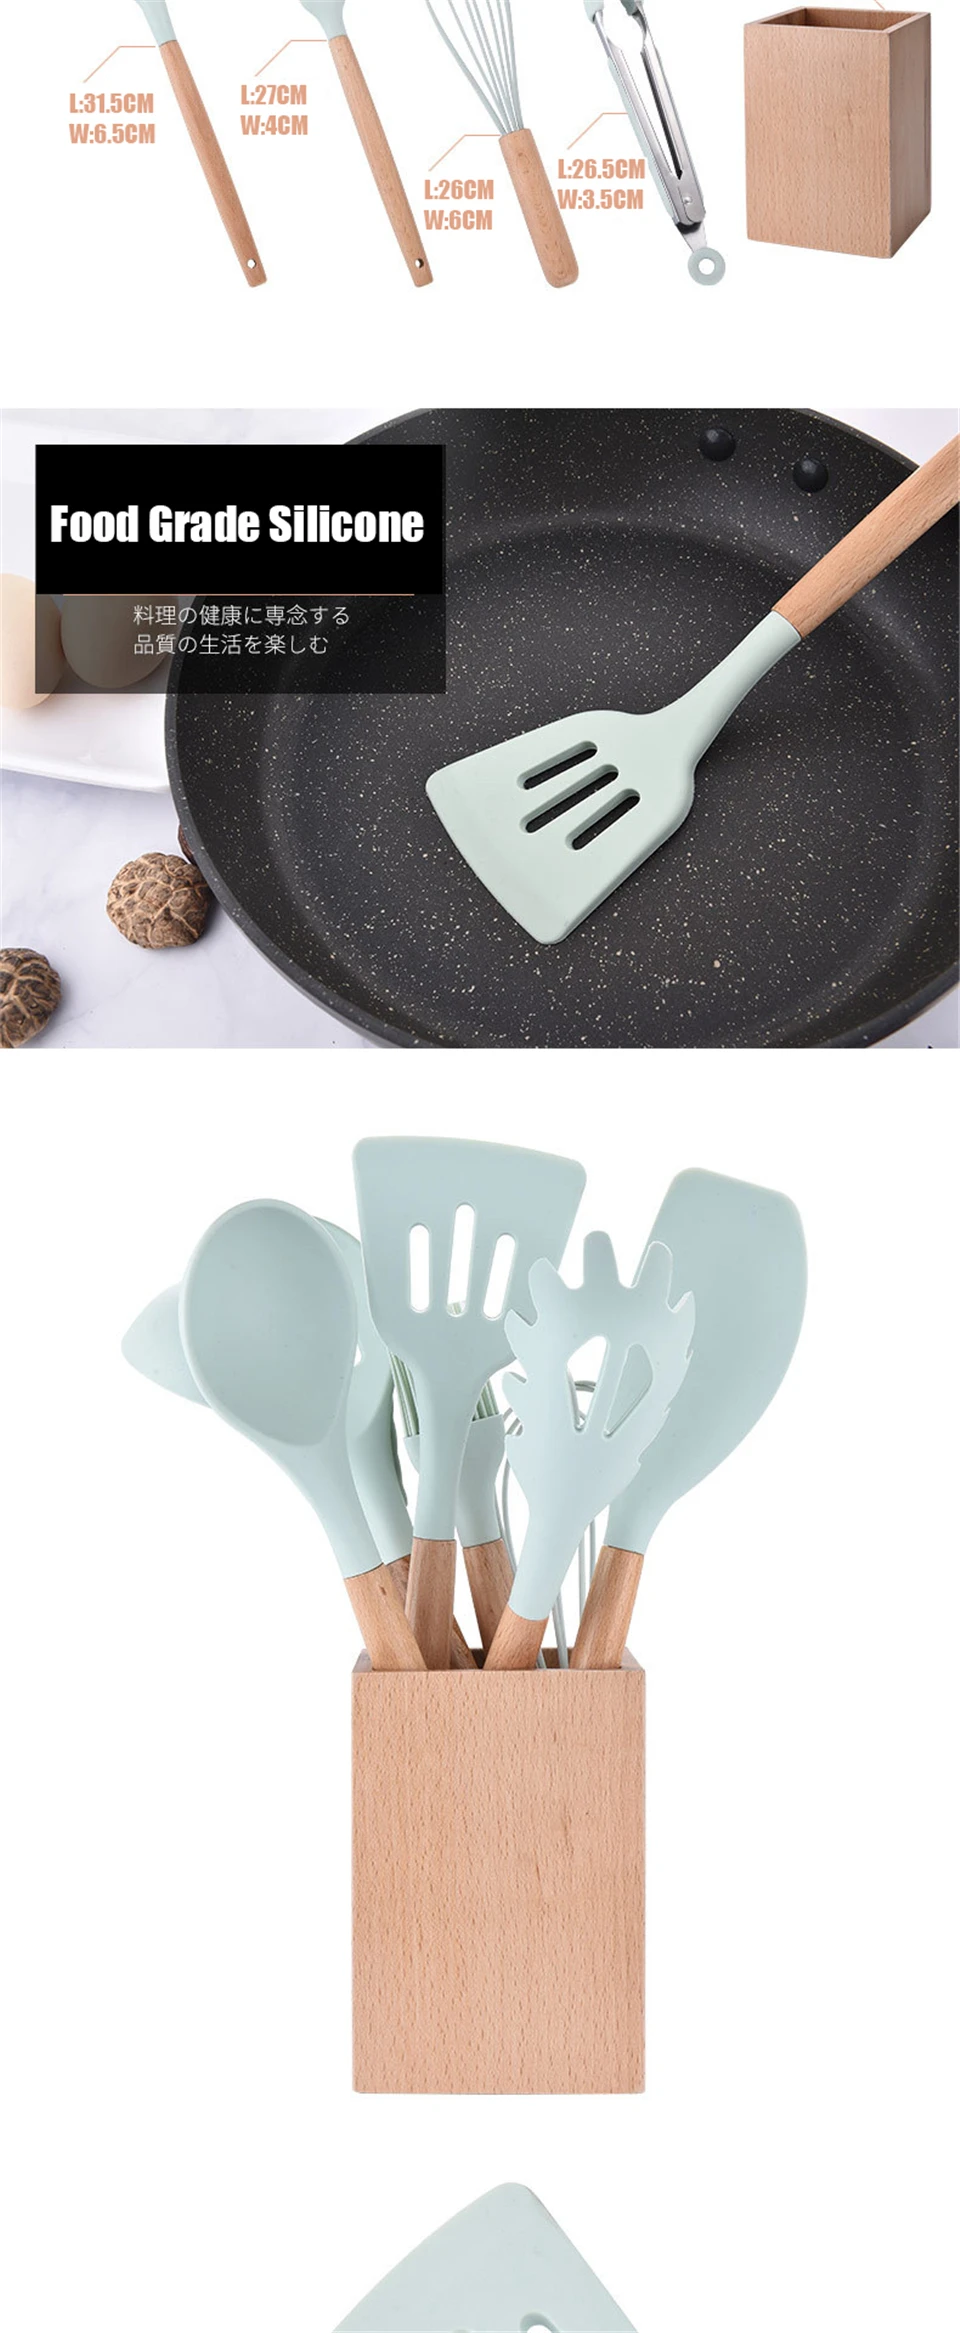 Silicone Non-stick Cooking Tools Kitchen Utensil Kitchenware With Natural Wooden Handle Nonstick Cookware Accessories Supplies